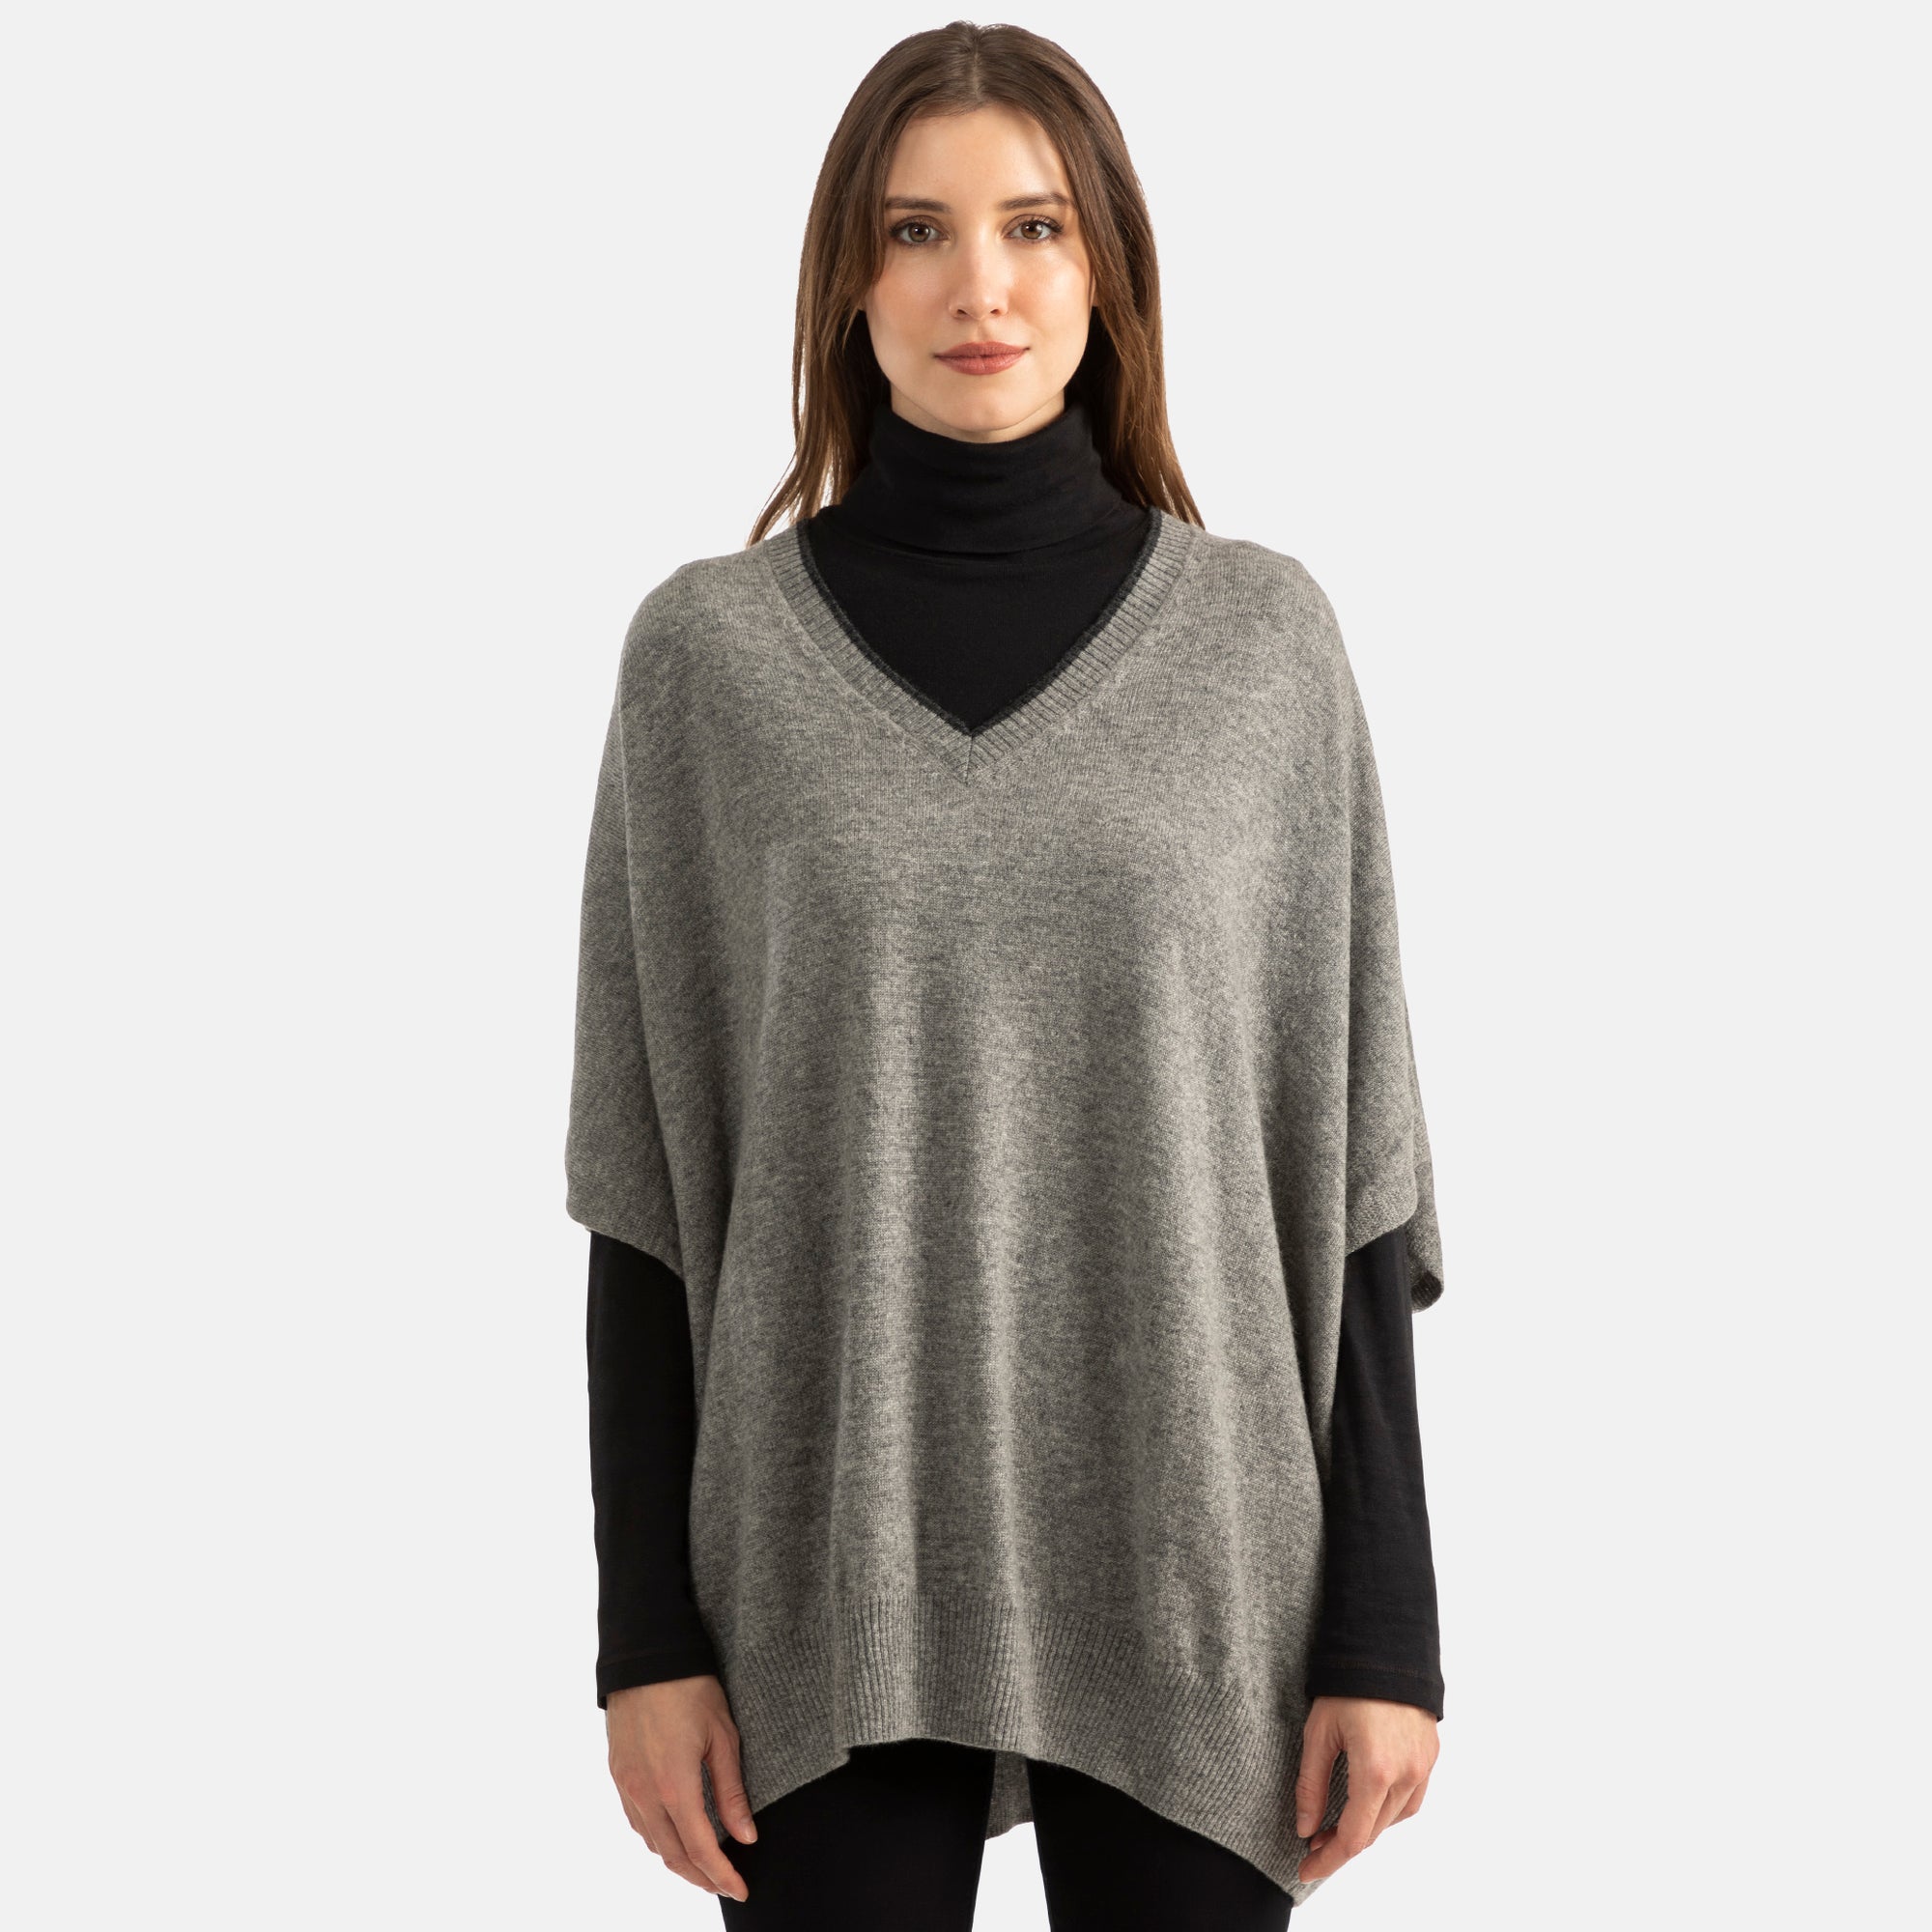 Picture of woman wearing an overhead v-neck ponch with contrast trim in grey with black trim